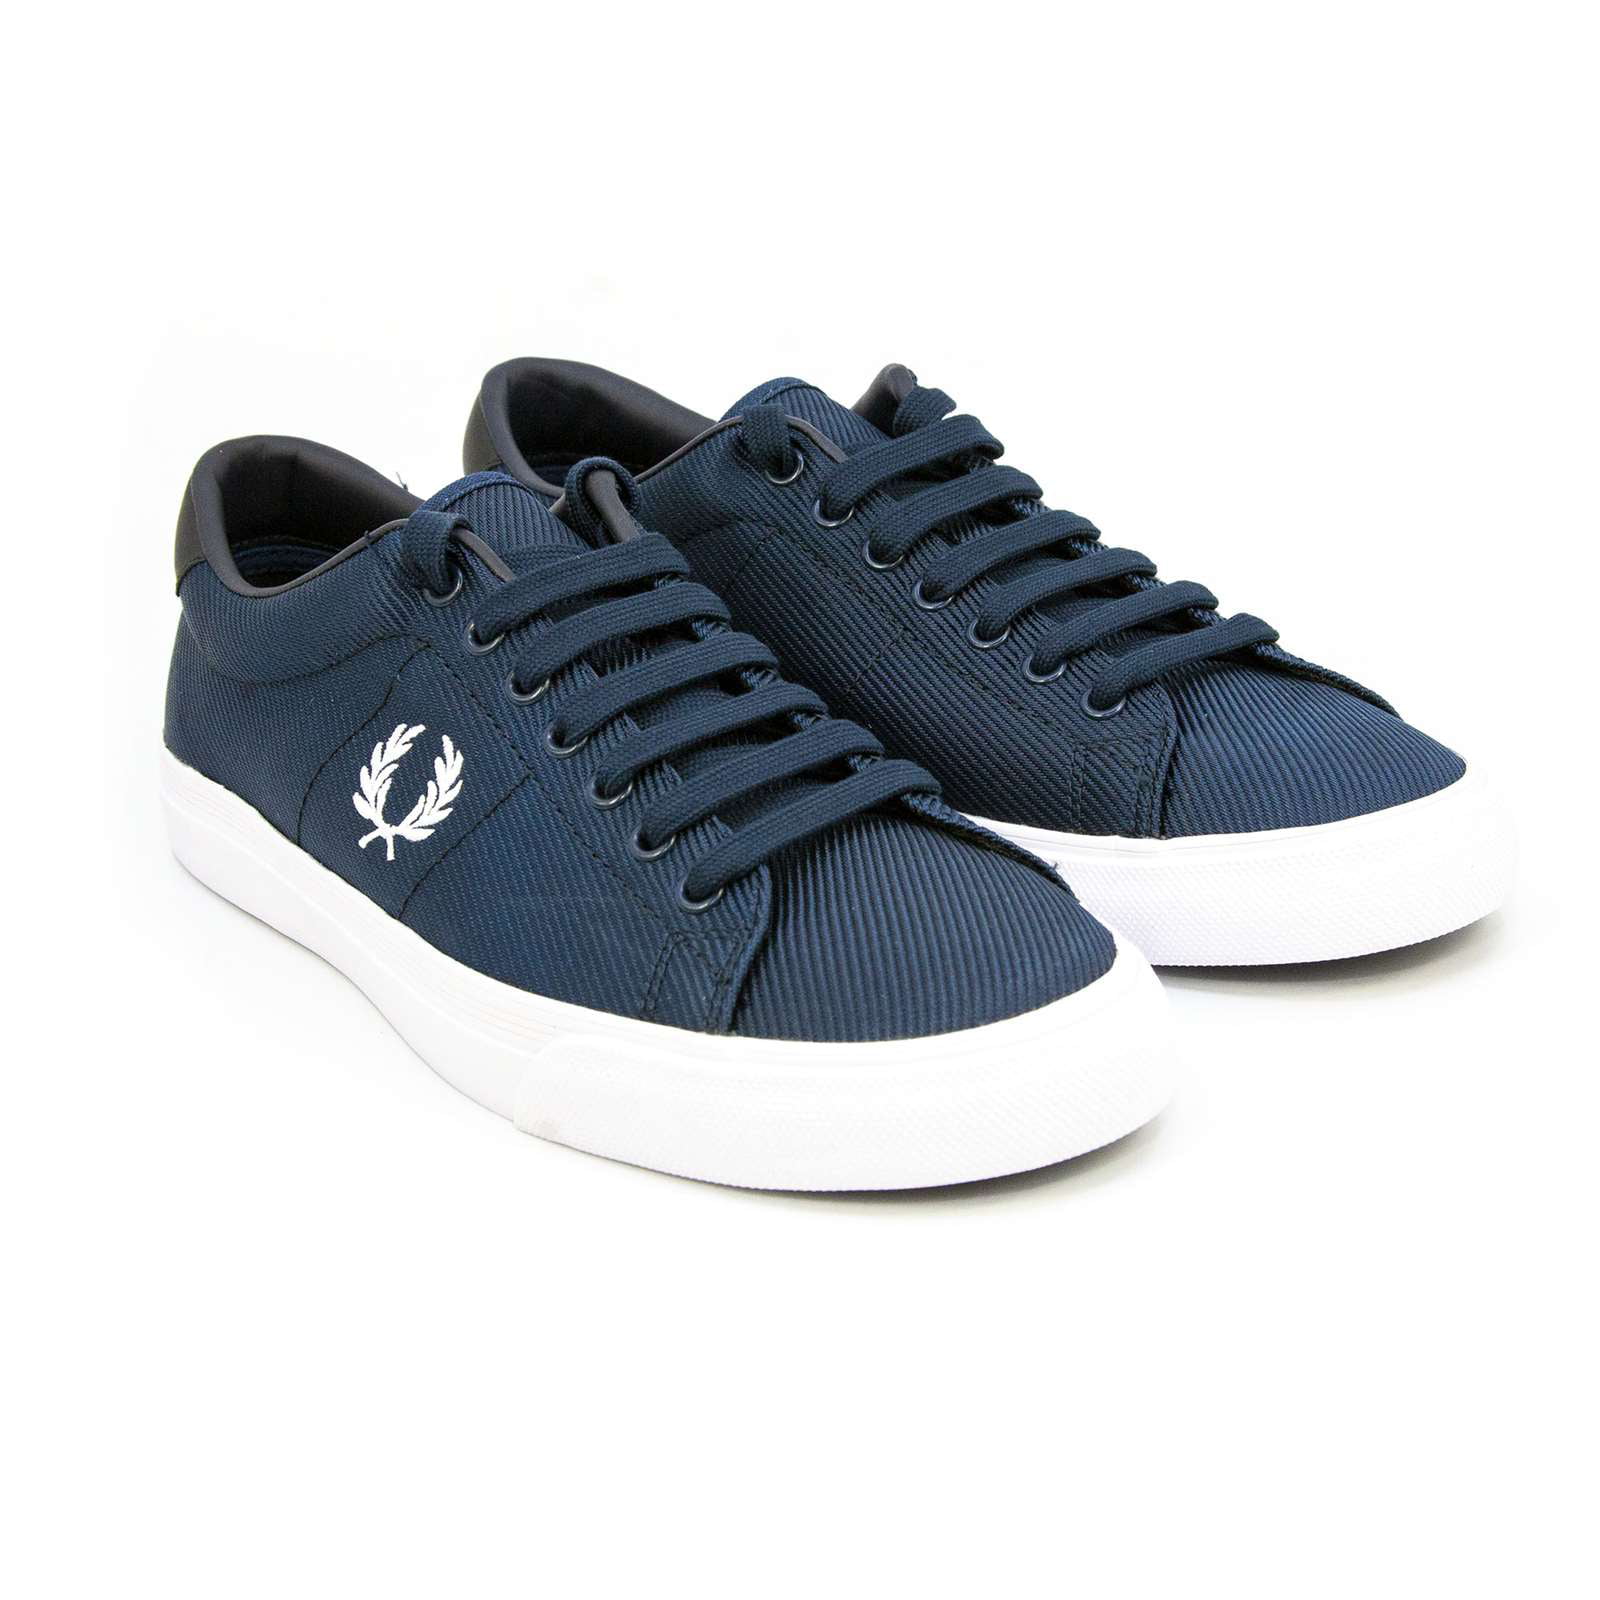 Fred Perry Men's Canvas/Leather Underspin Tennis Sneakers Comfort Shoes NEW 